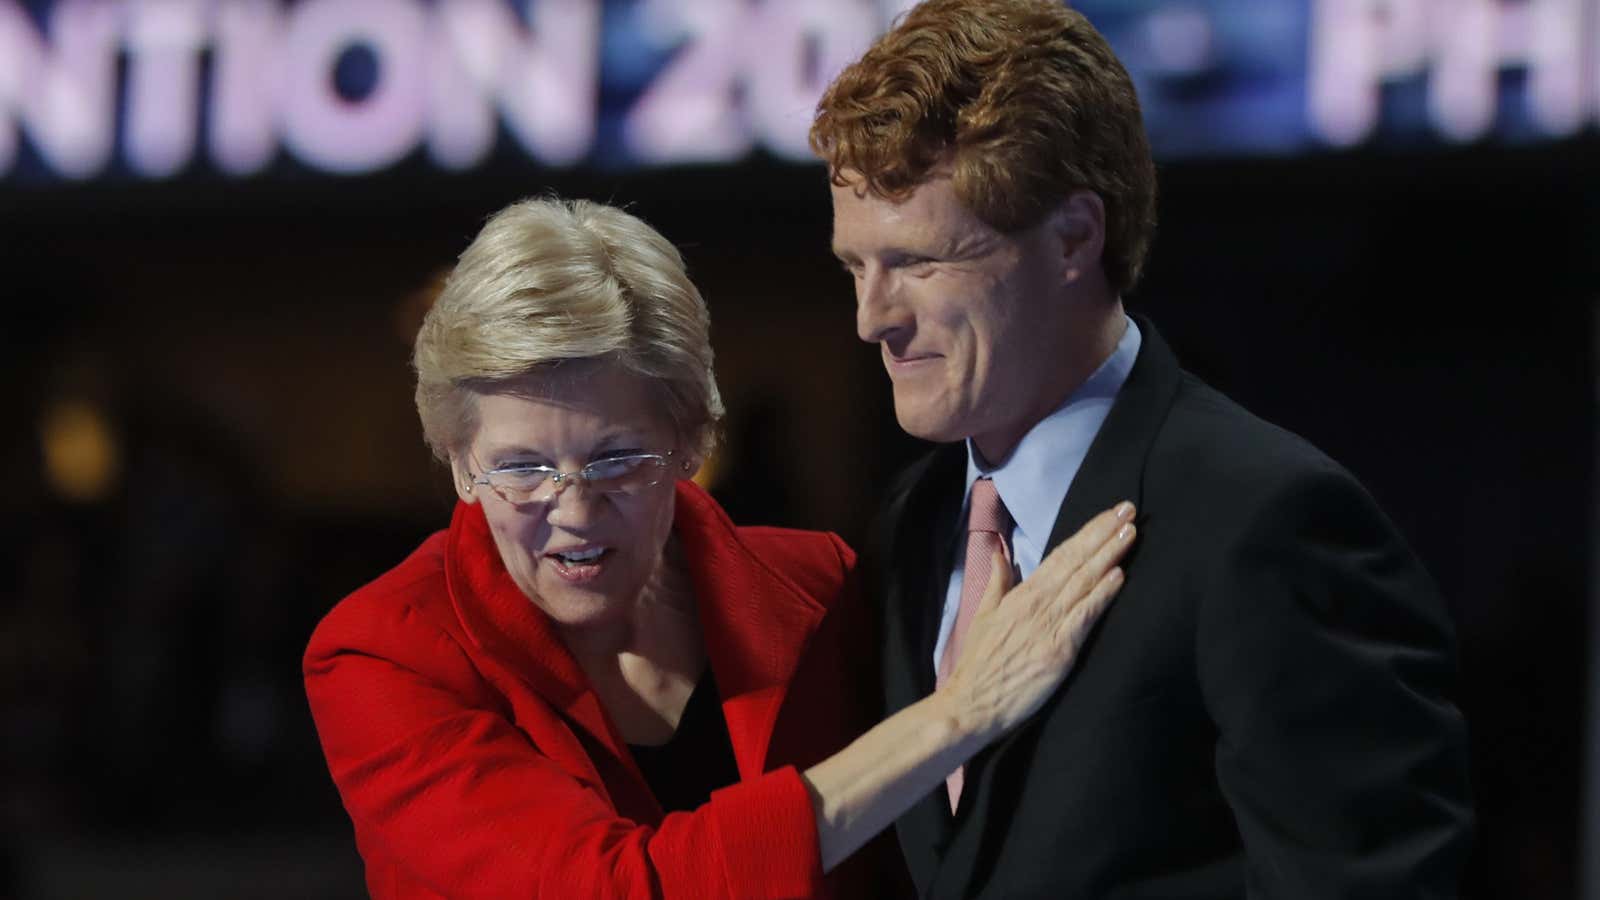 Kennedy with senator Elizabeth Warren at the Democratic National Convention in 2016.